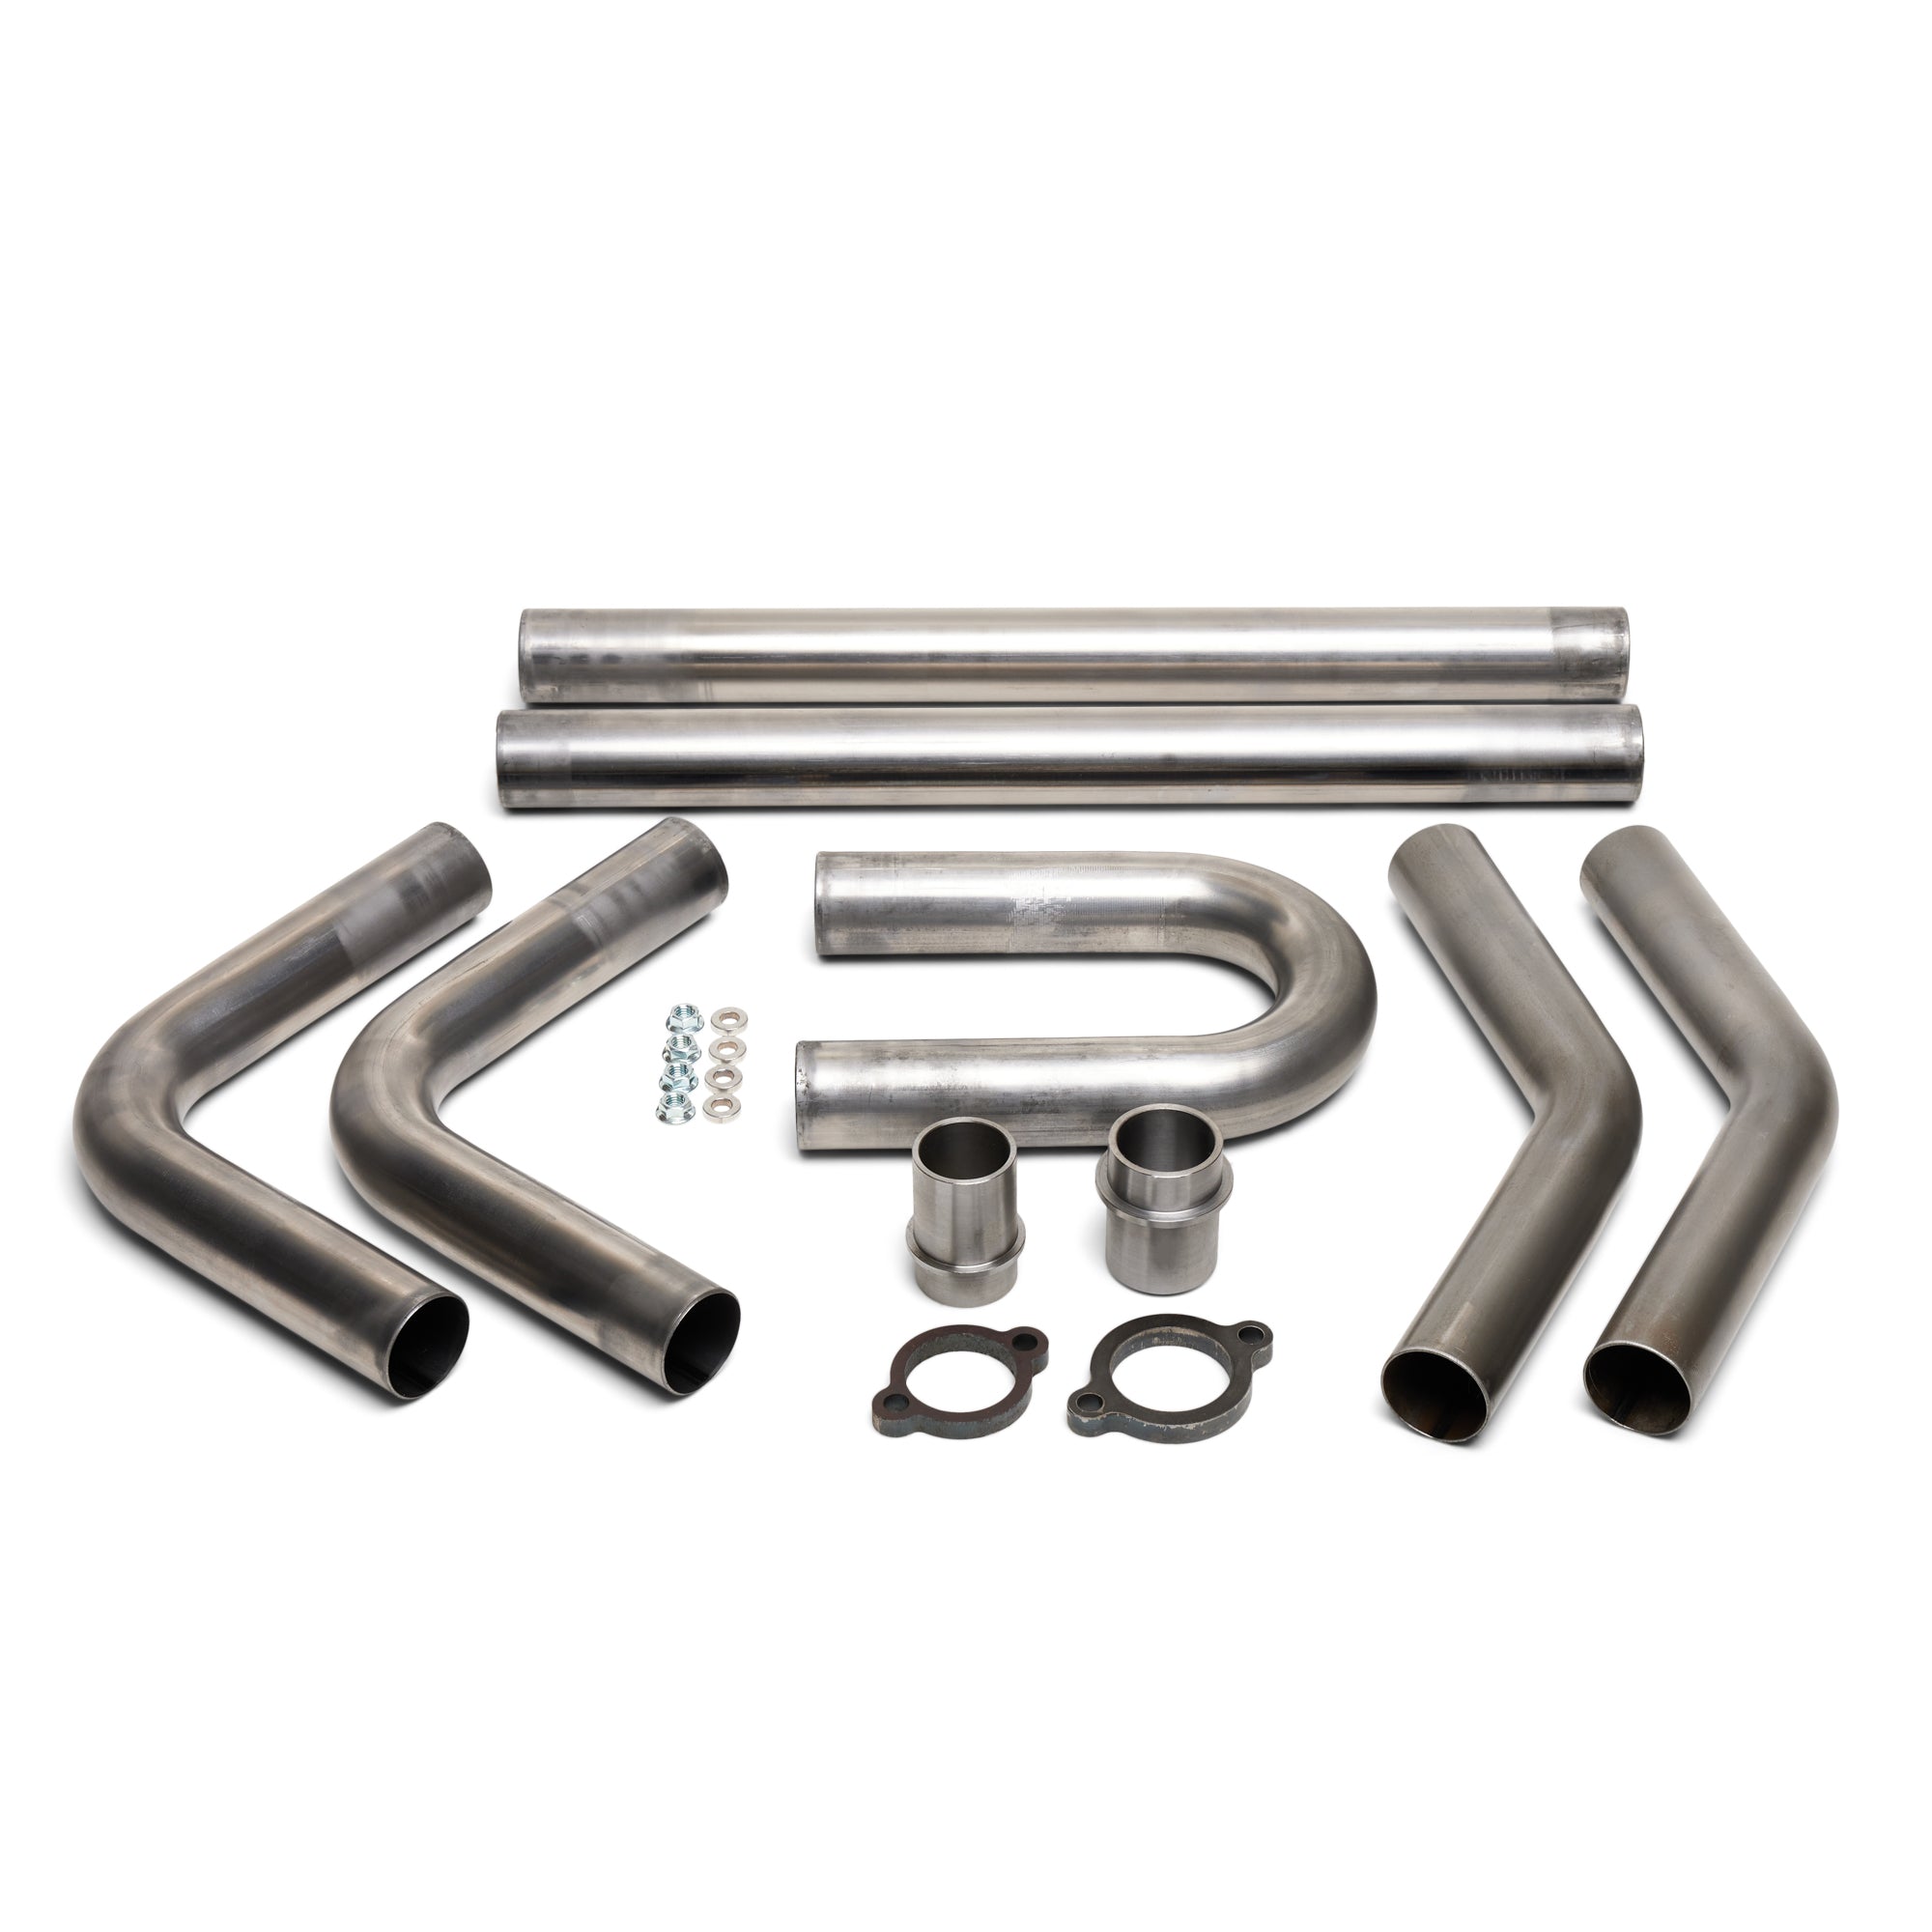 Builders Exhaust Kit for Honda Shadow VT600 VLX 600 Fits Years 1988 - 2007